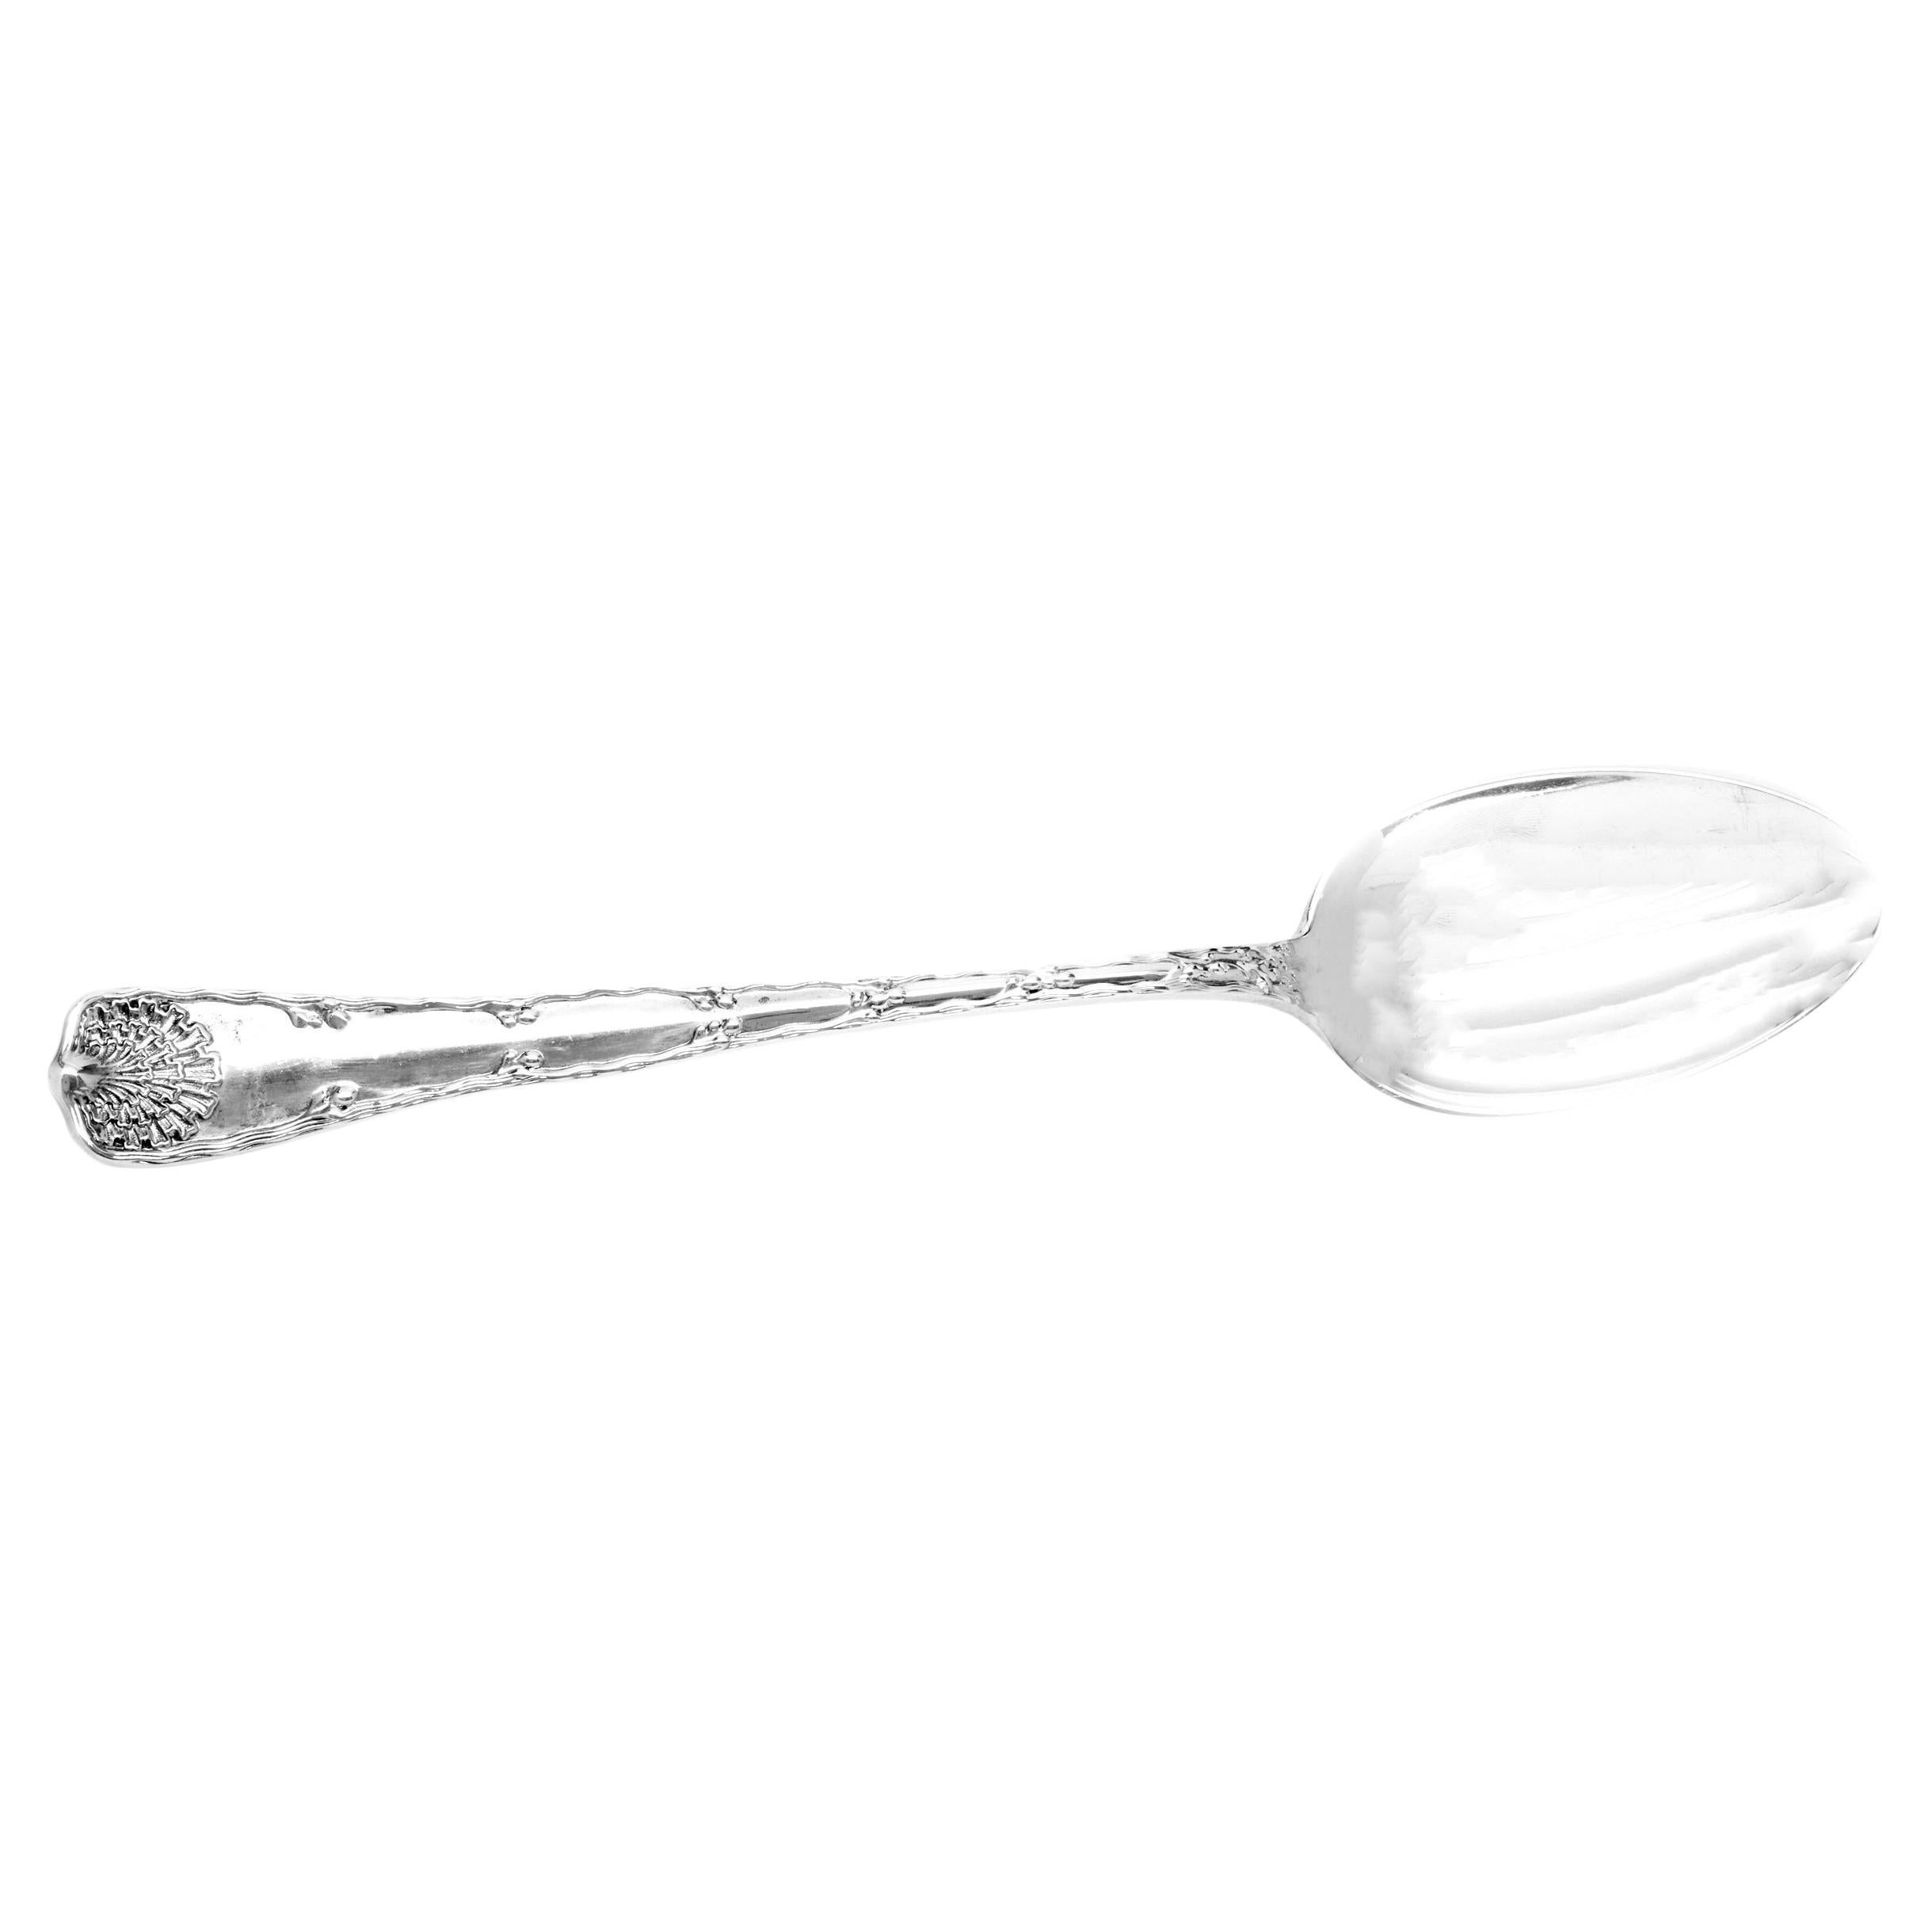 Tiffany & Co. Sterling Silver Large Serving Ladle